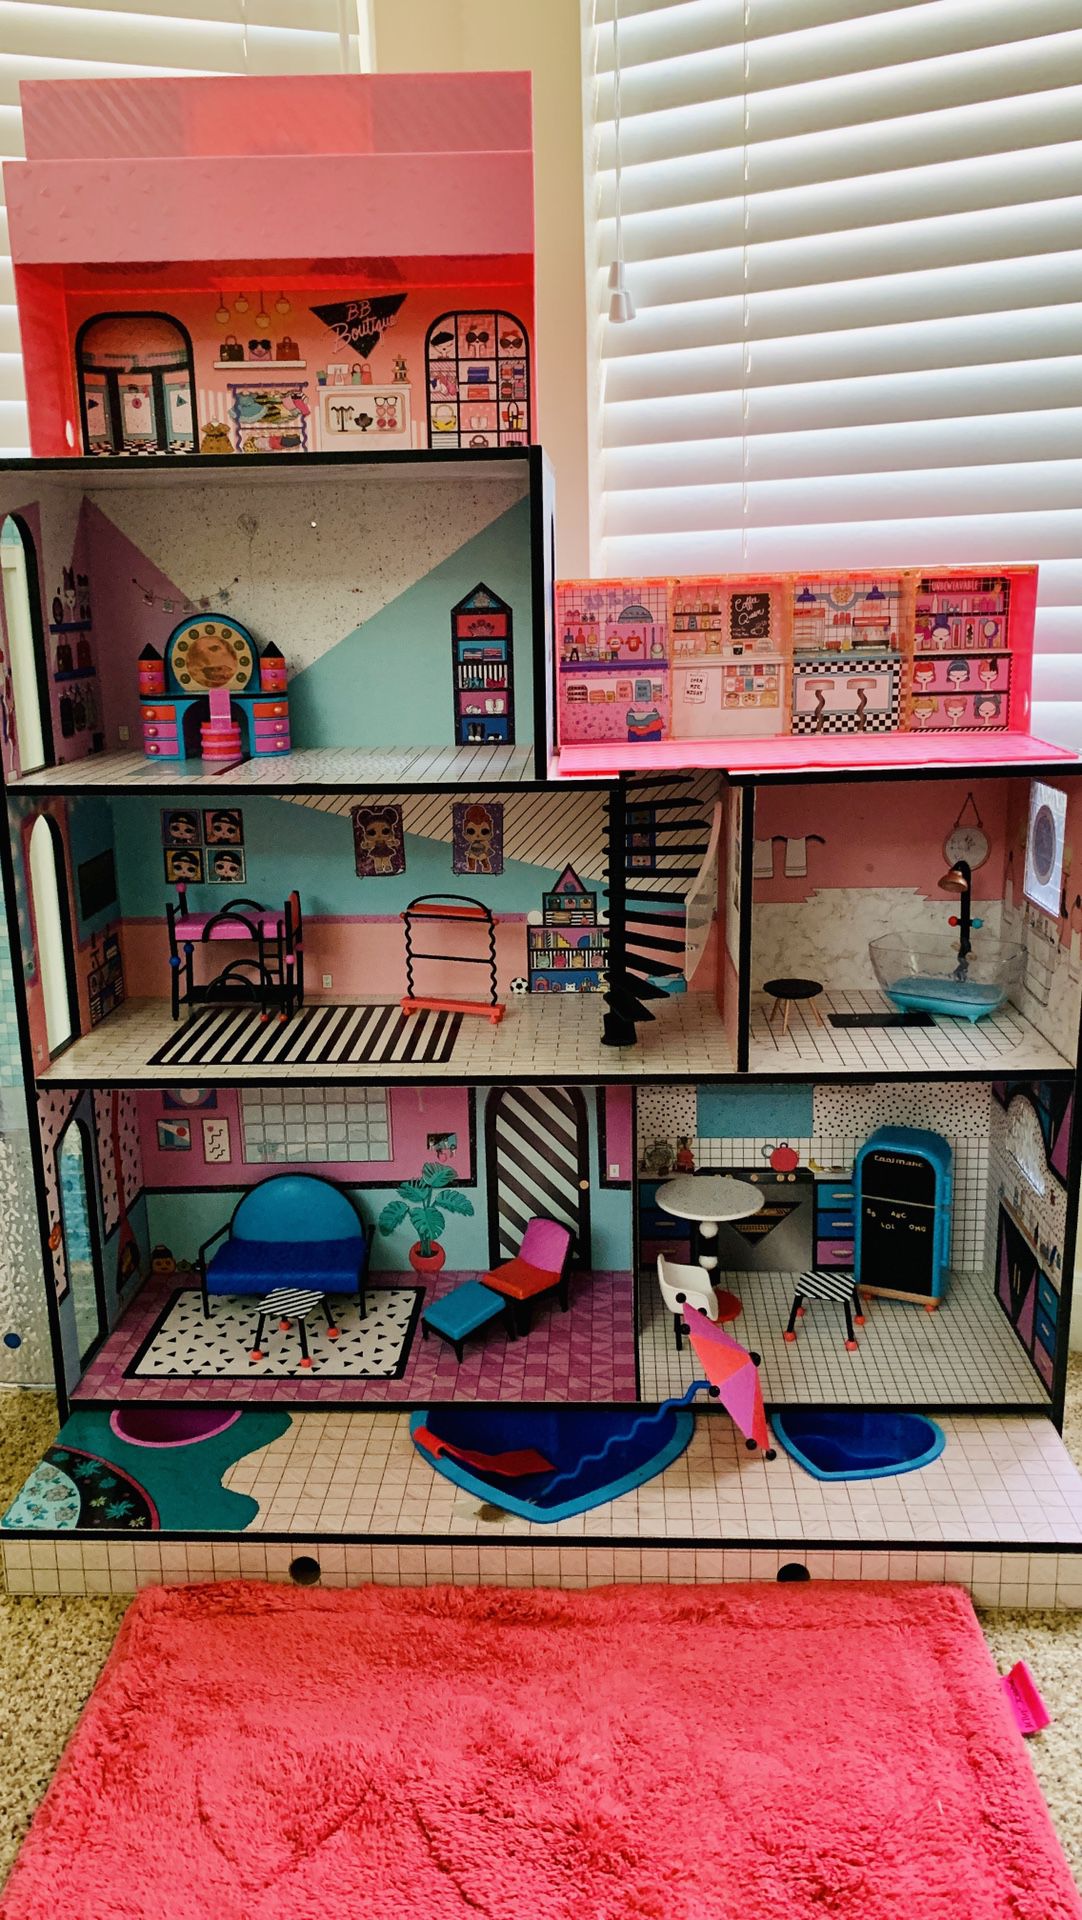 Lol Surprise Doll House & Display Case/Pop Up Store